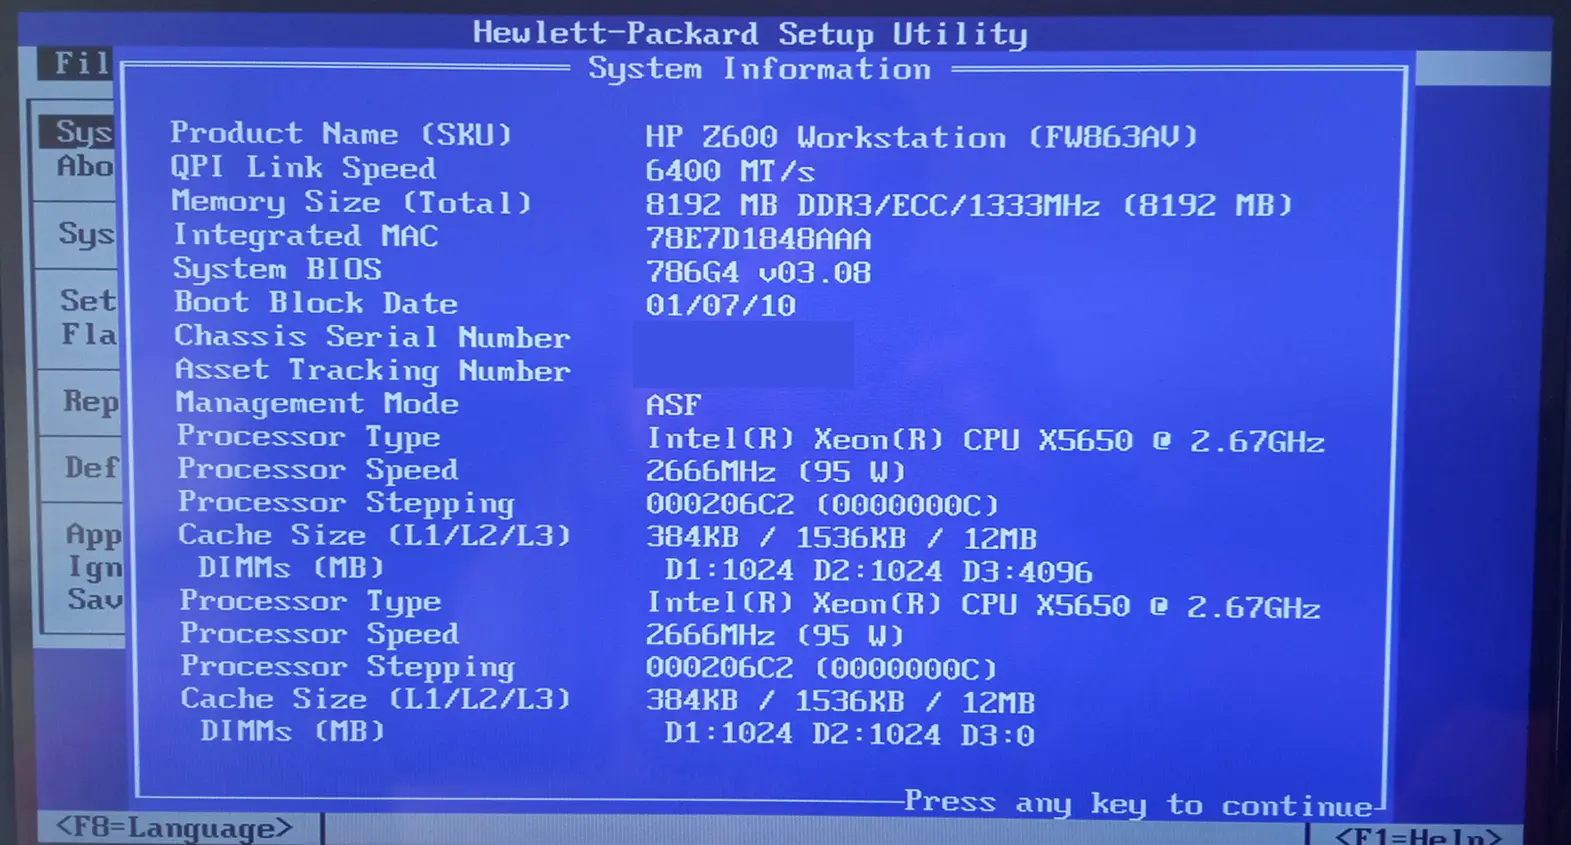 hewlett-packard 0b54h upgrade - How do I check to see if my HP Z600 is a V1 or V2